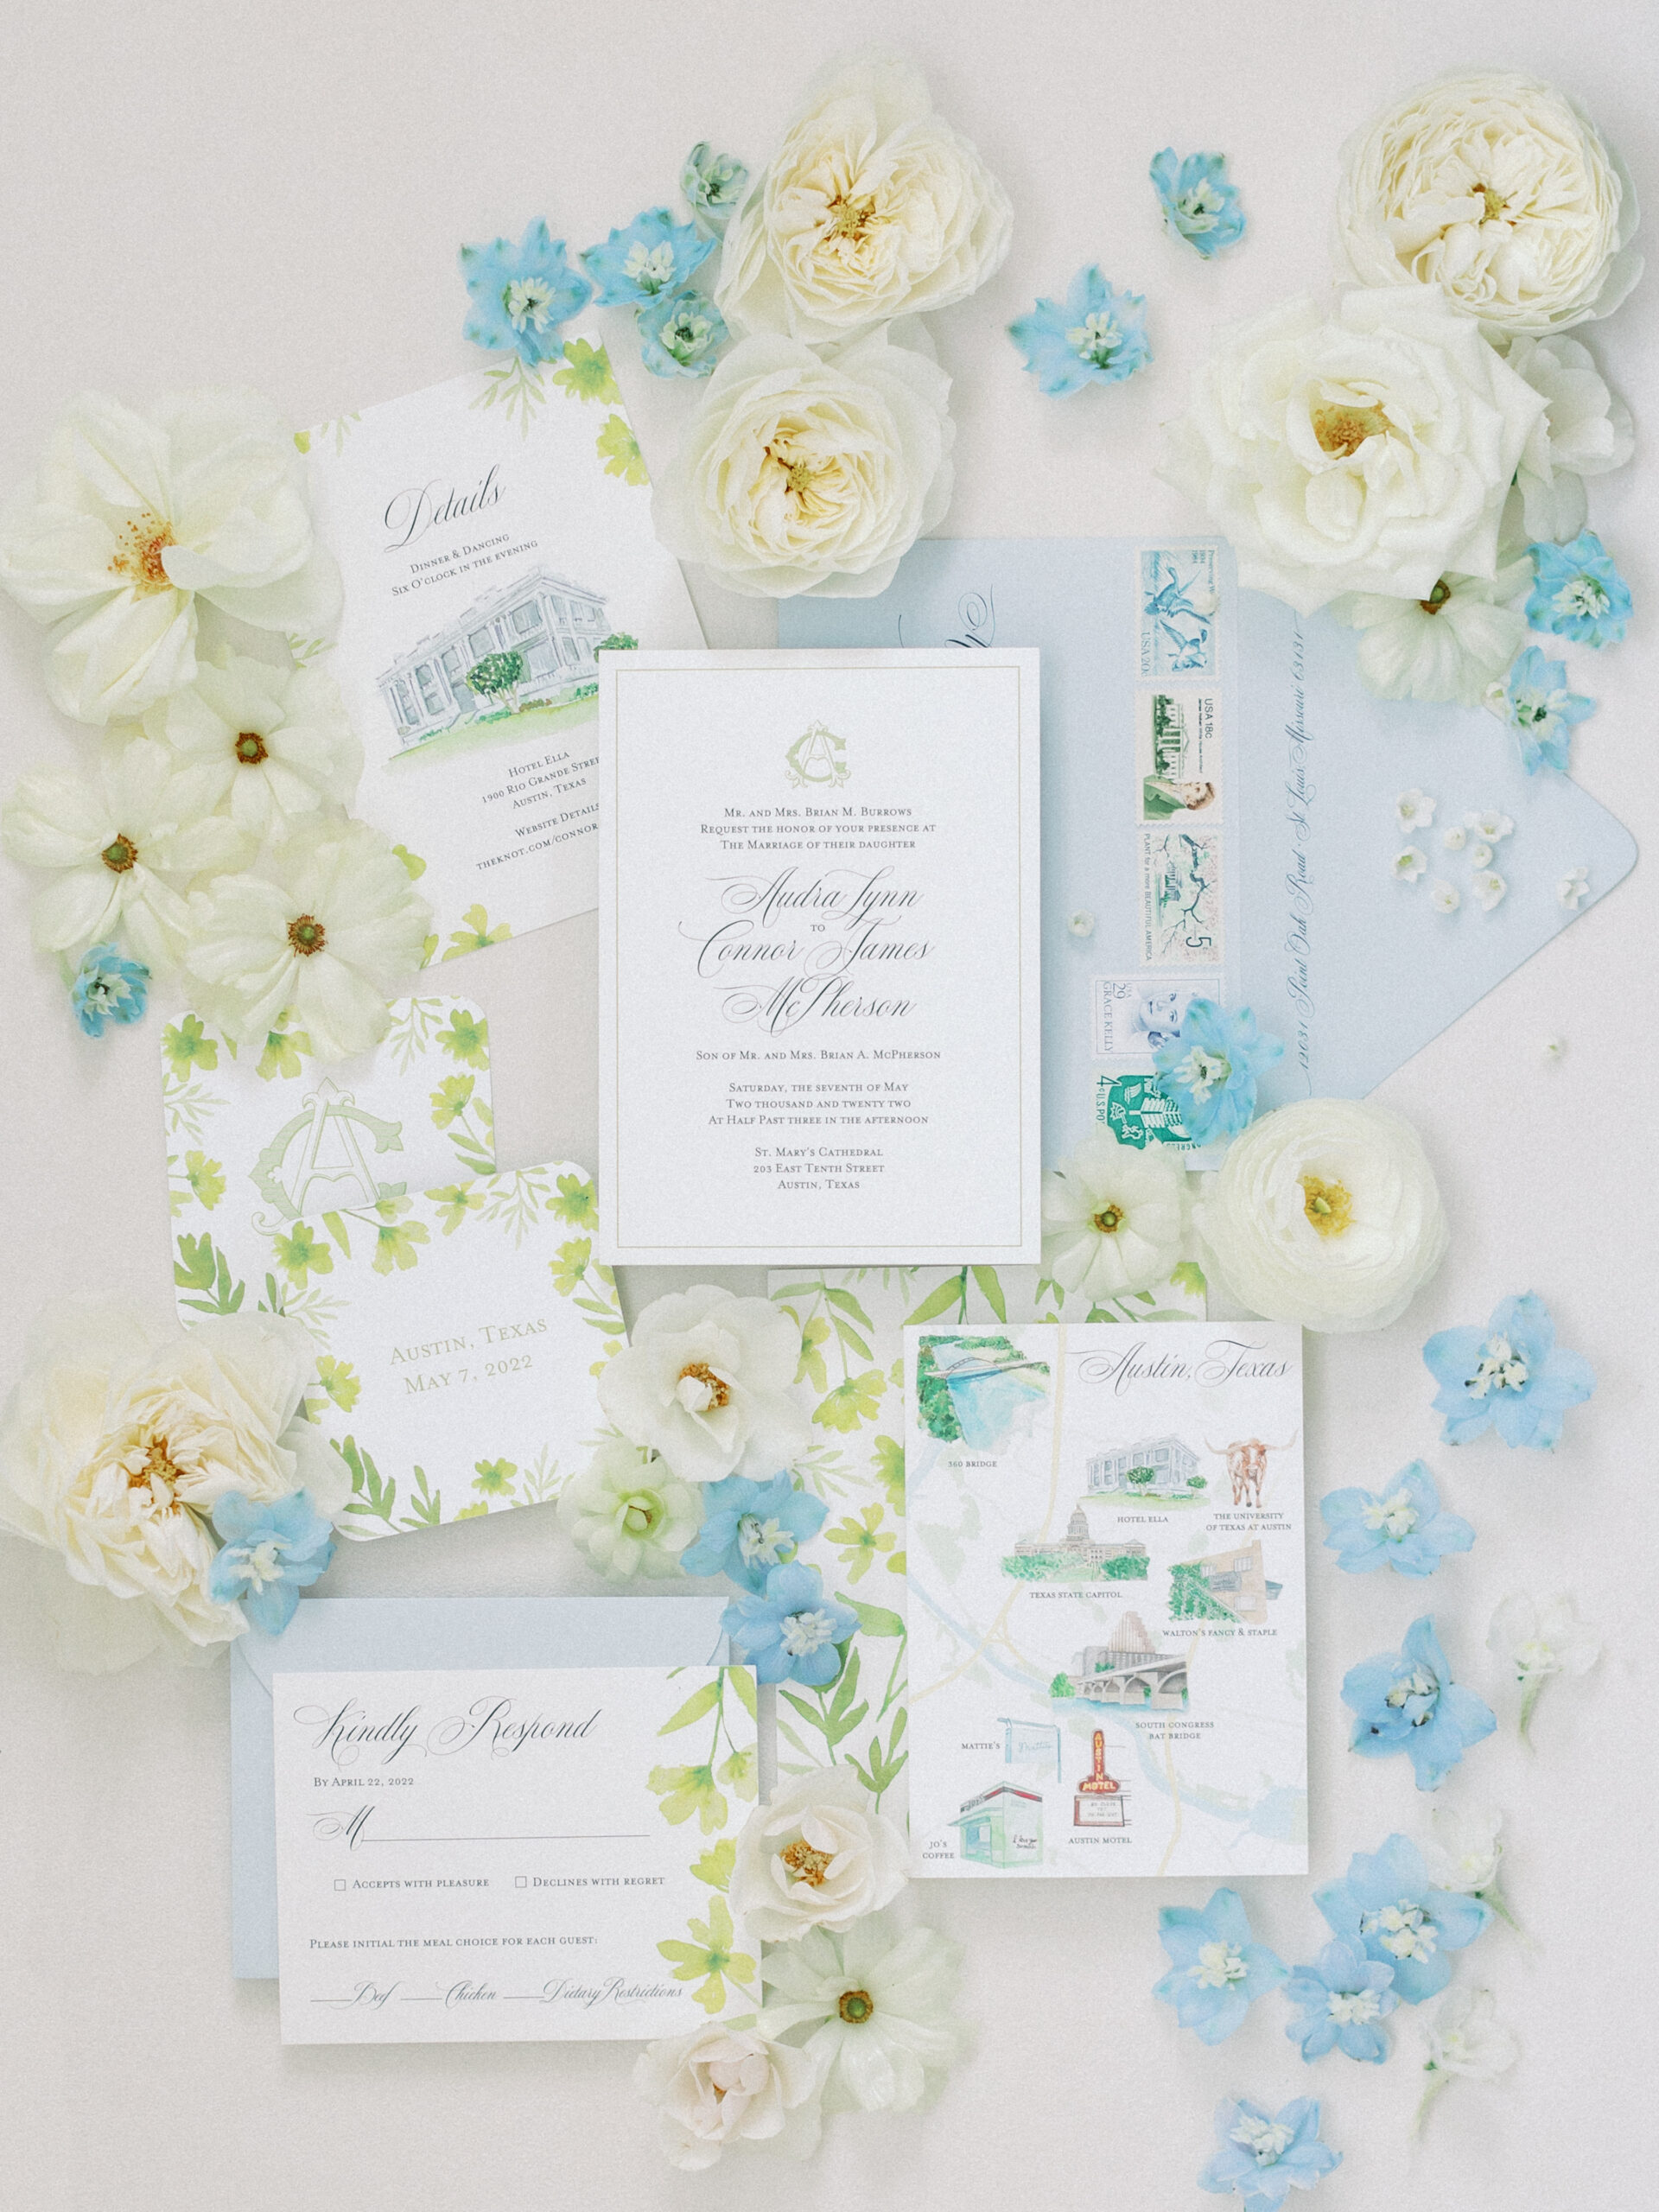 hotel ella invitation suite for wedding styled on a board with flowers around blue and white